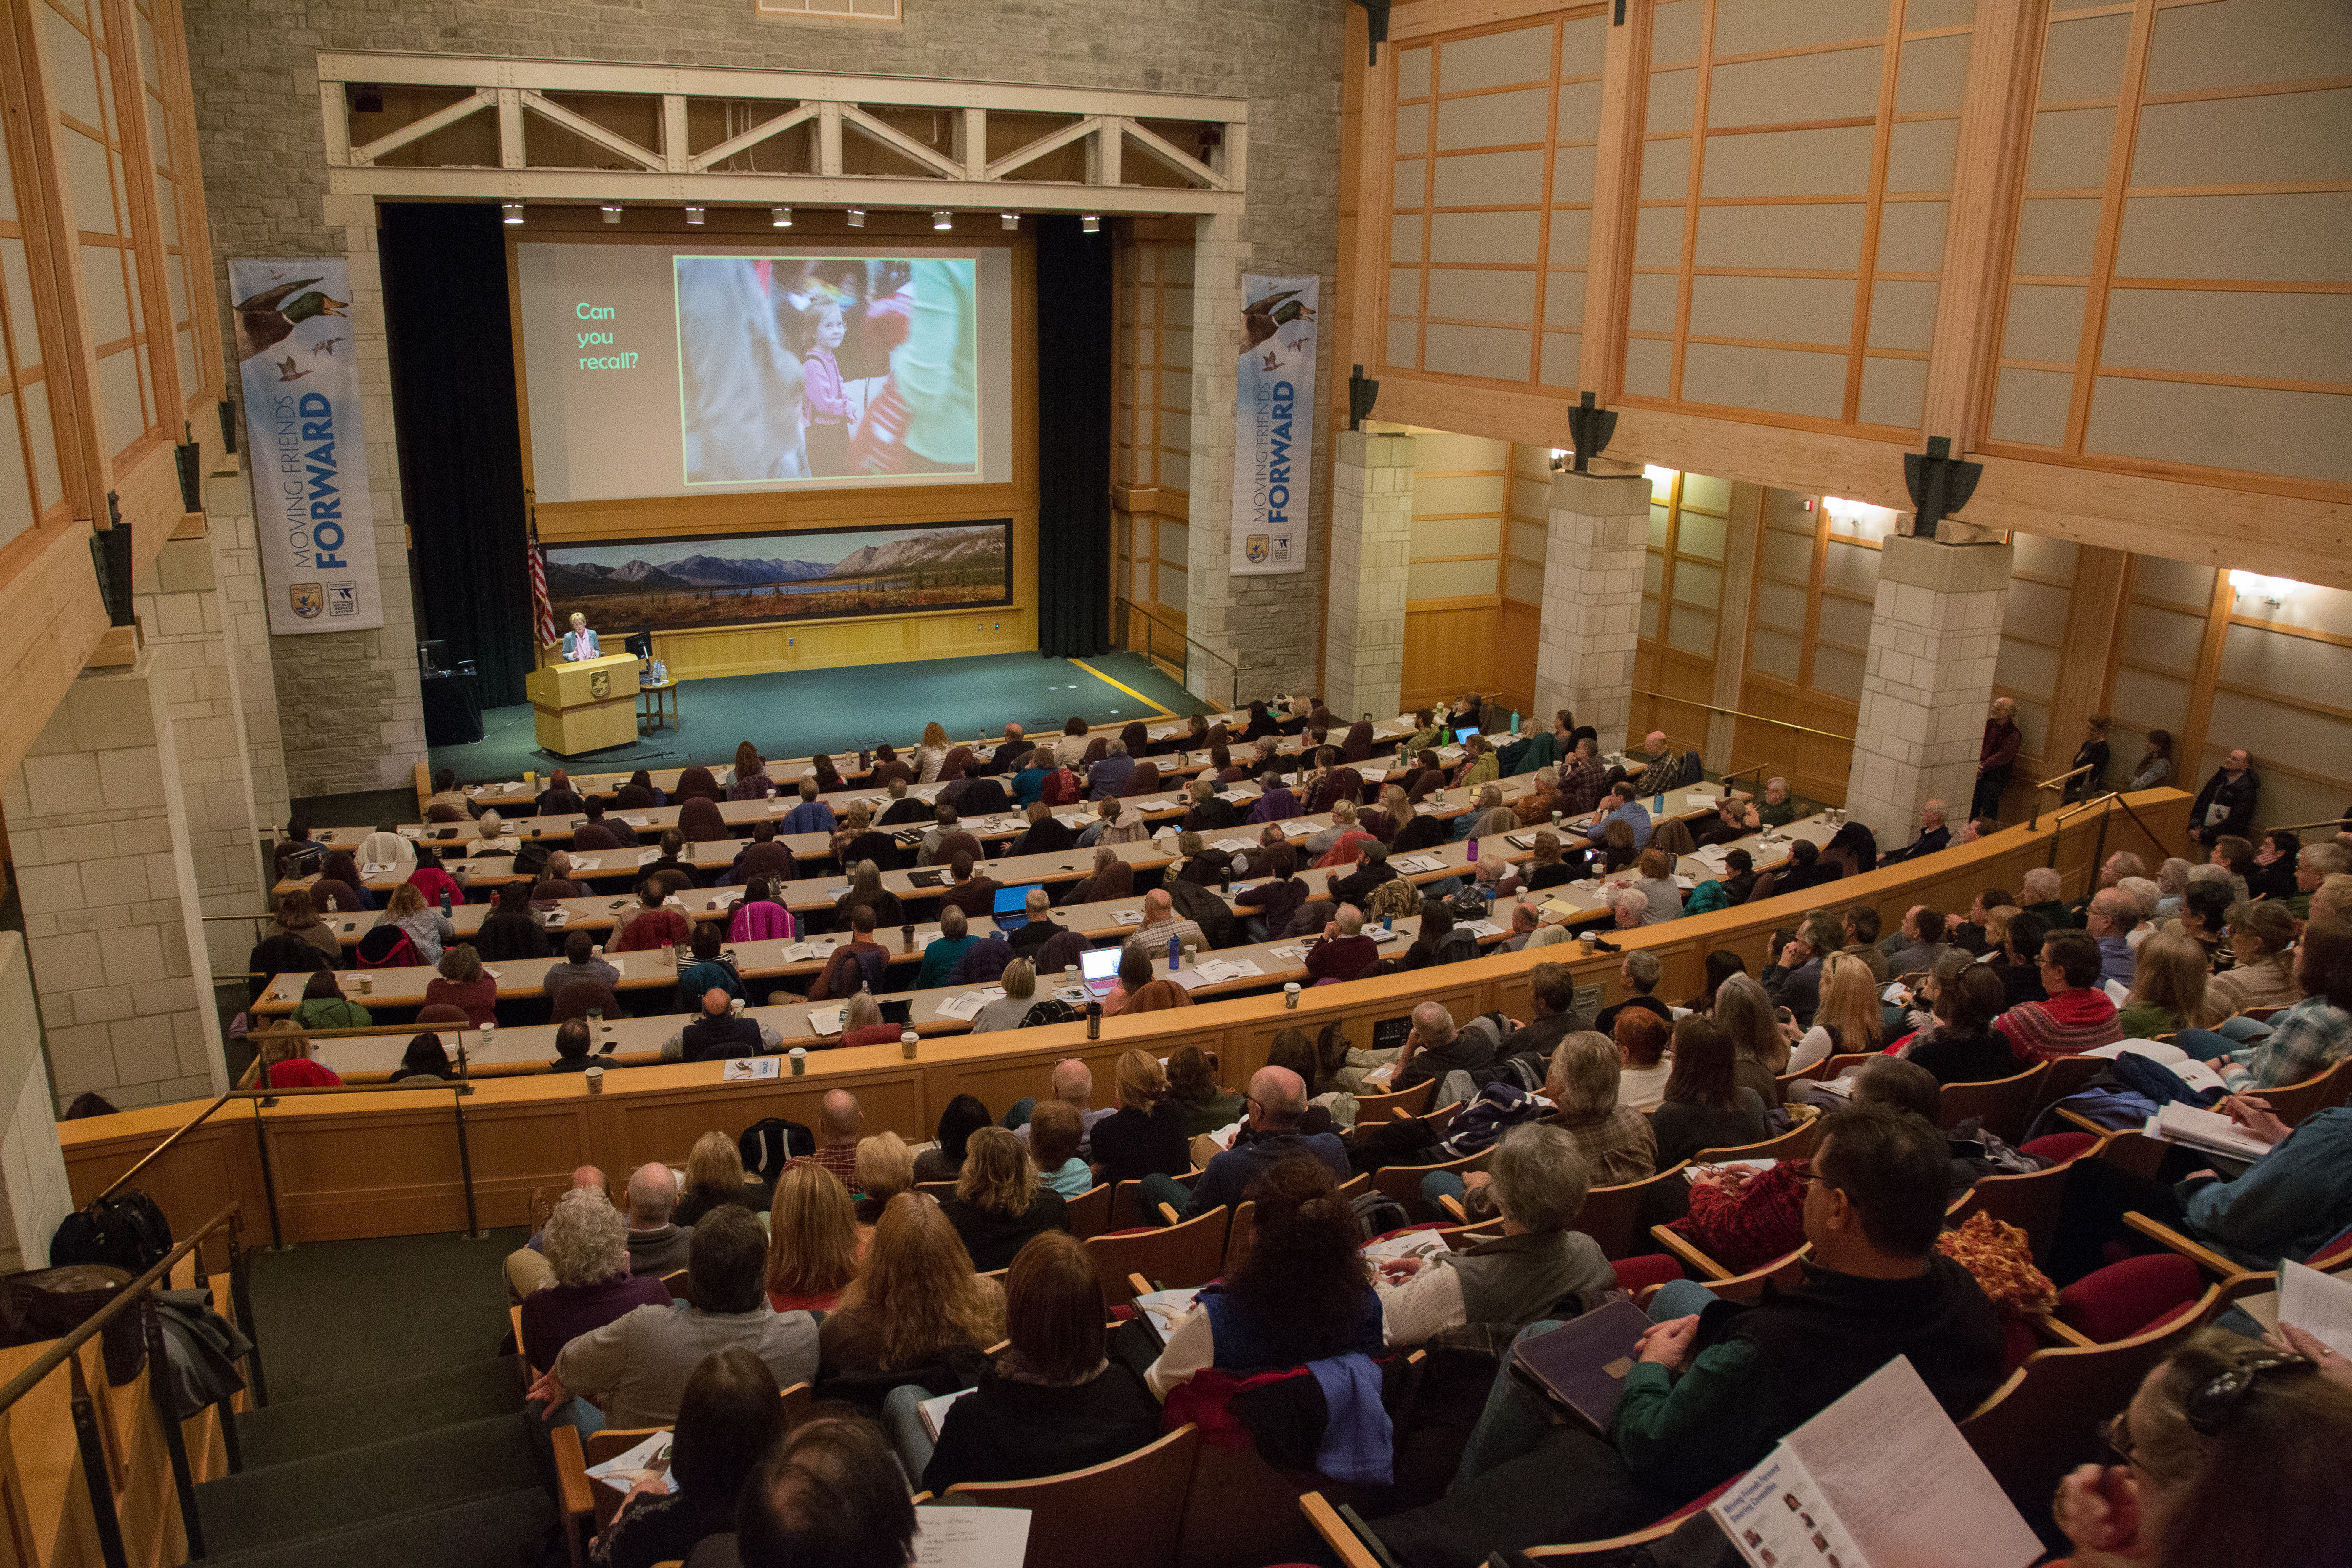 auditorium filled with people viewing presentation on large projection screen